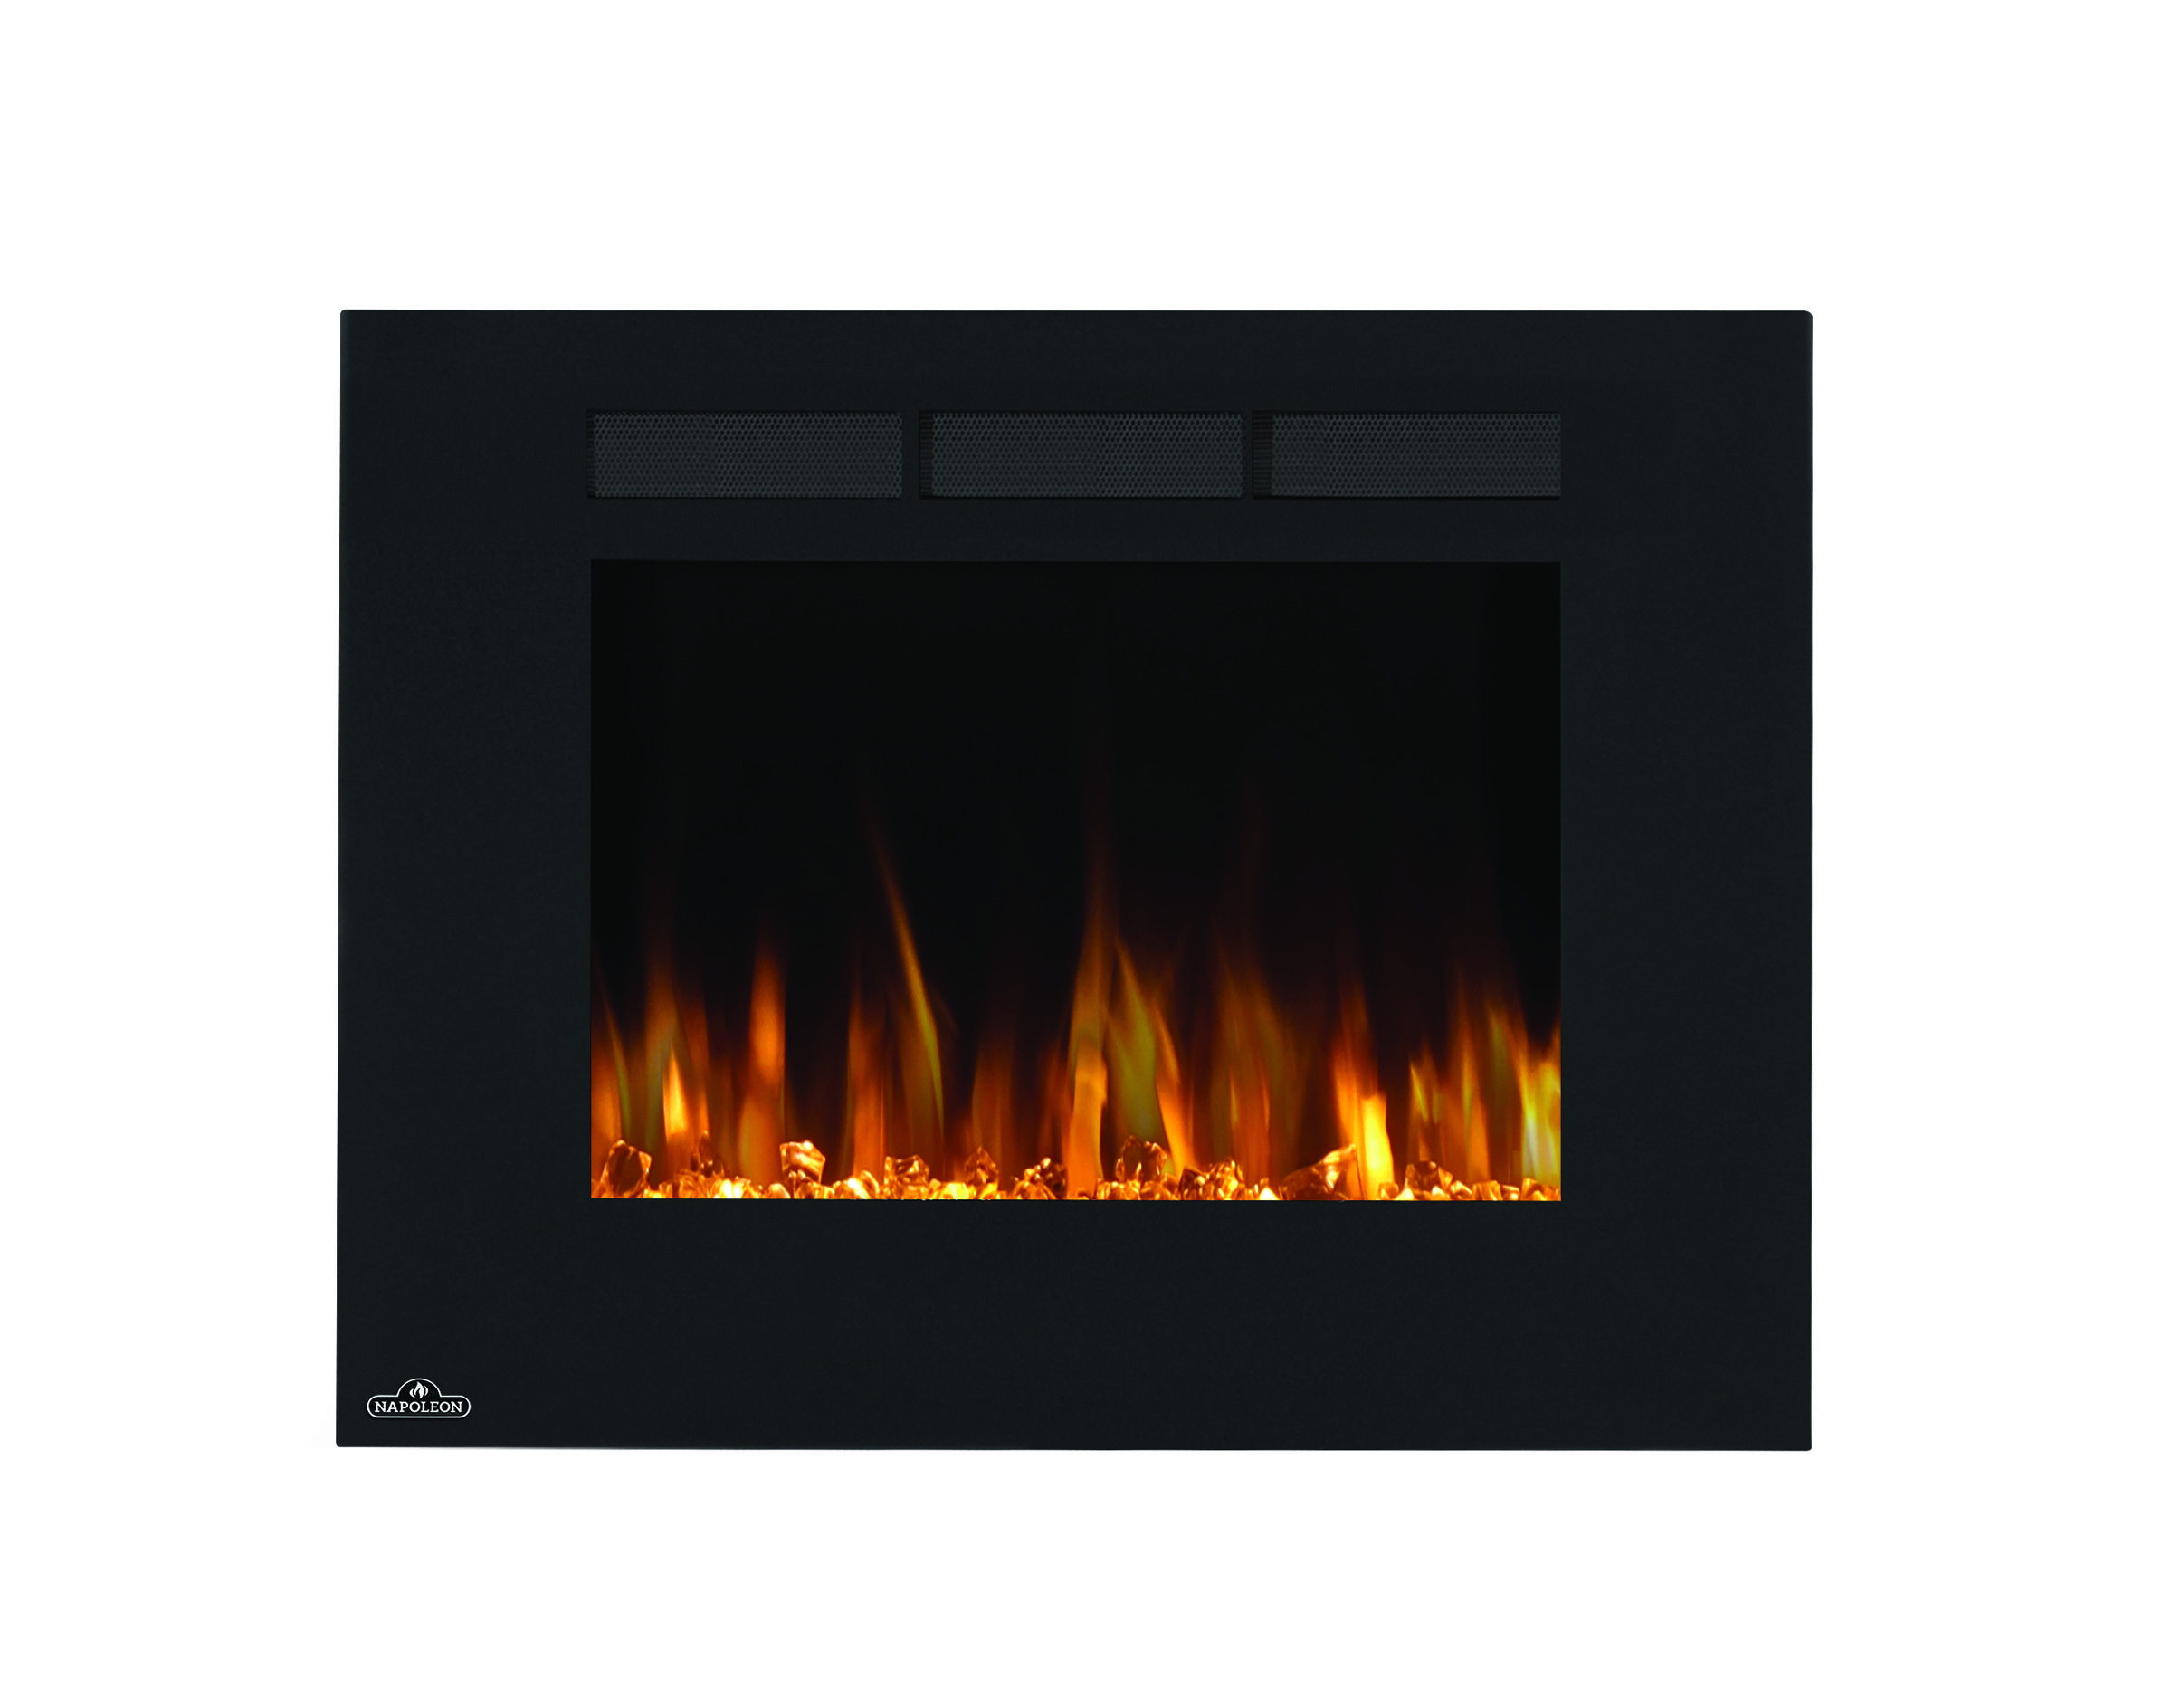 Northwest Fireplaces Luxury Electric Fireplace Wall Mounted Led Fire and Ice Flame